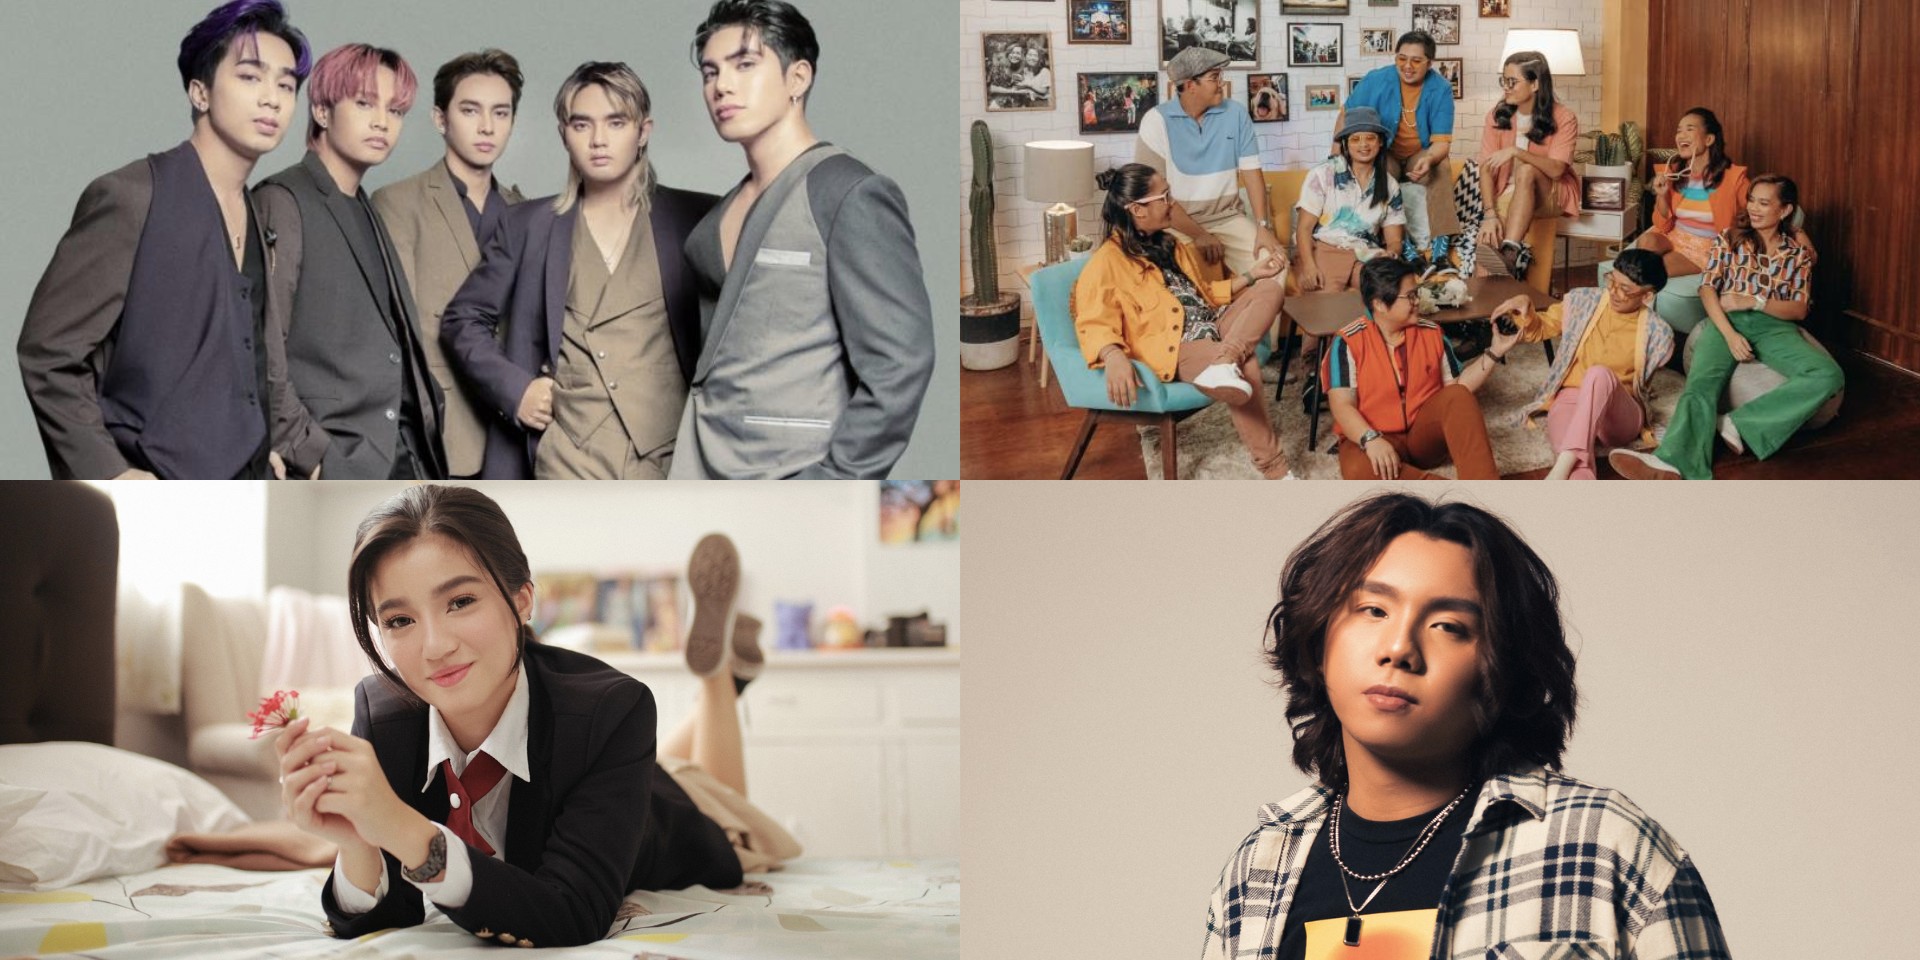 SB19, Ben&Ben, Belle Mariano, Zack Tabudlo, and more win at the 35th Awit Awards 